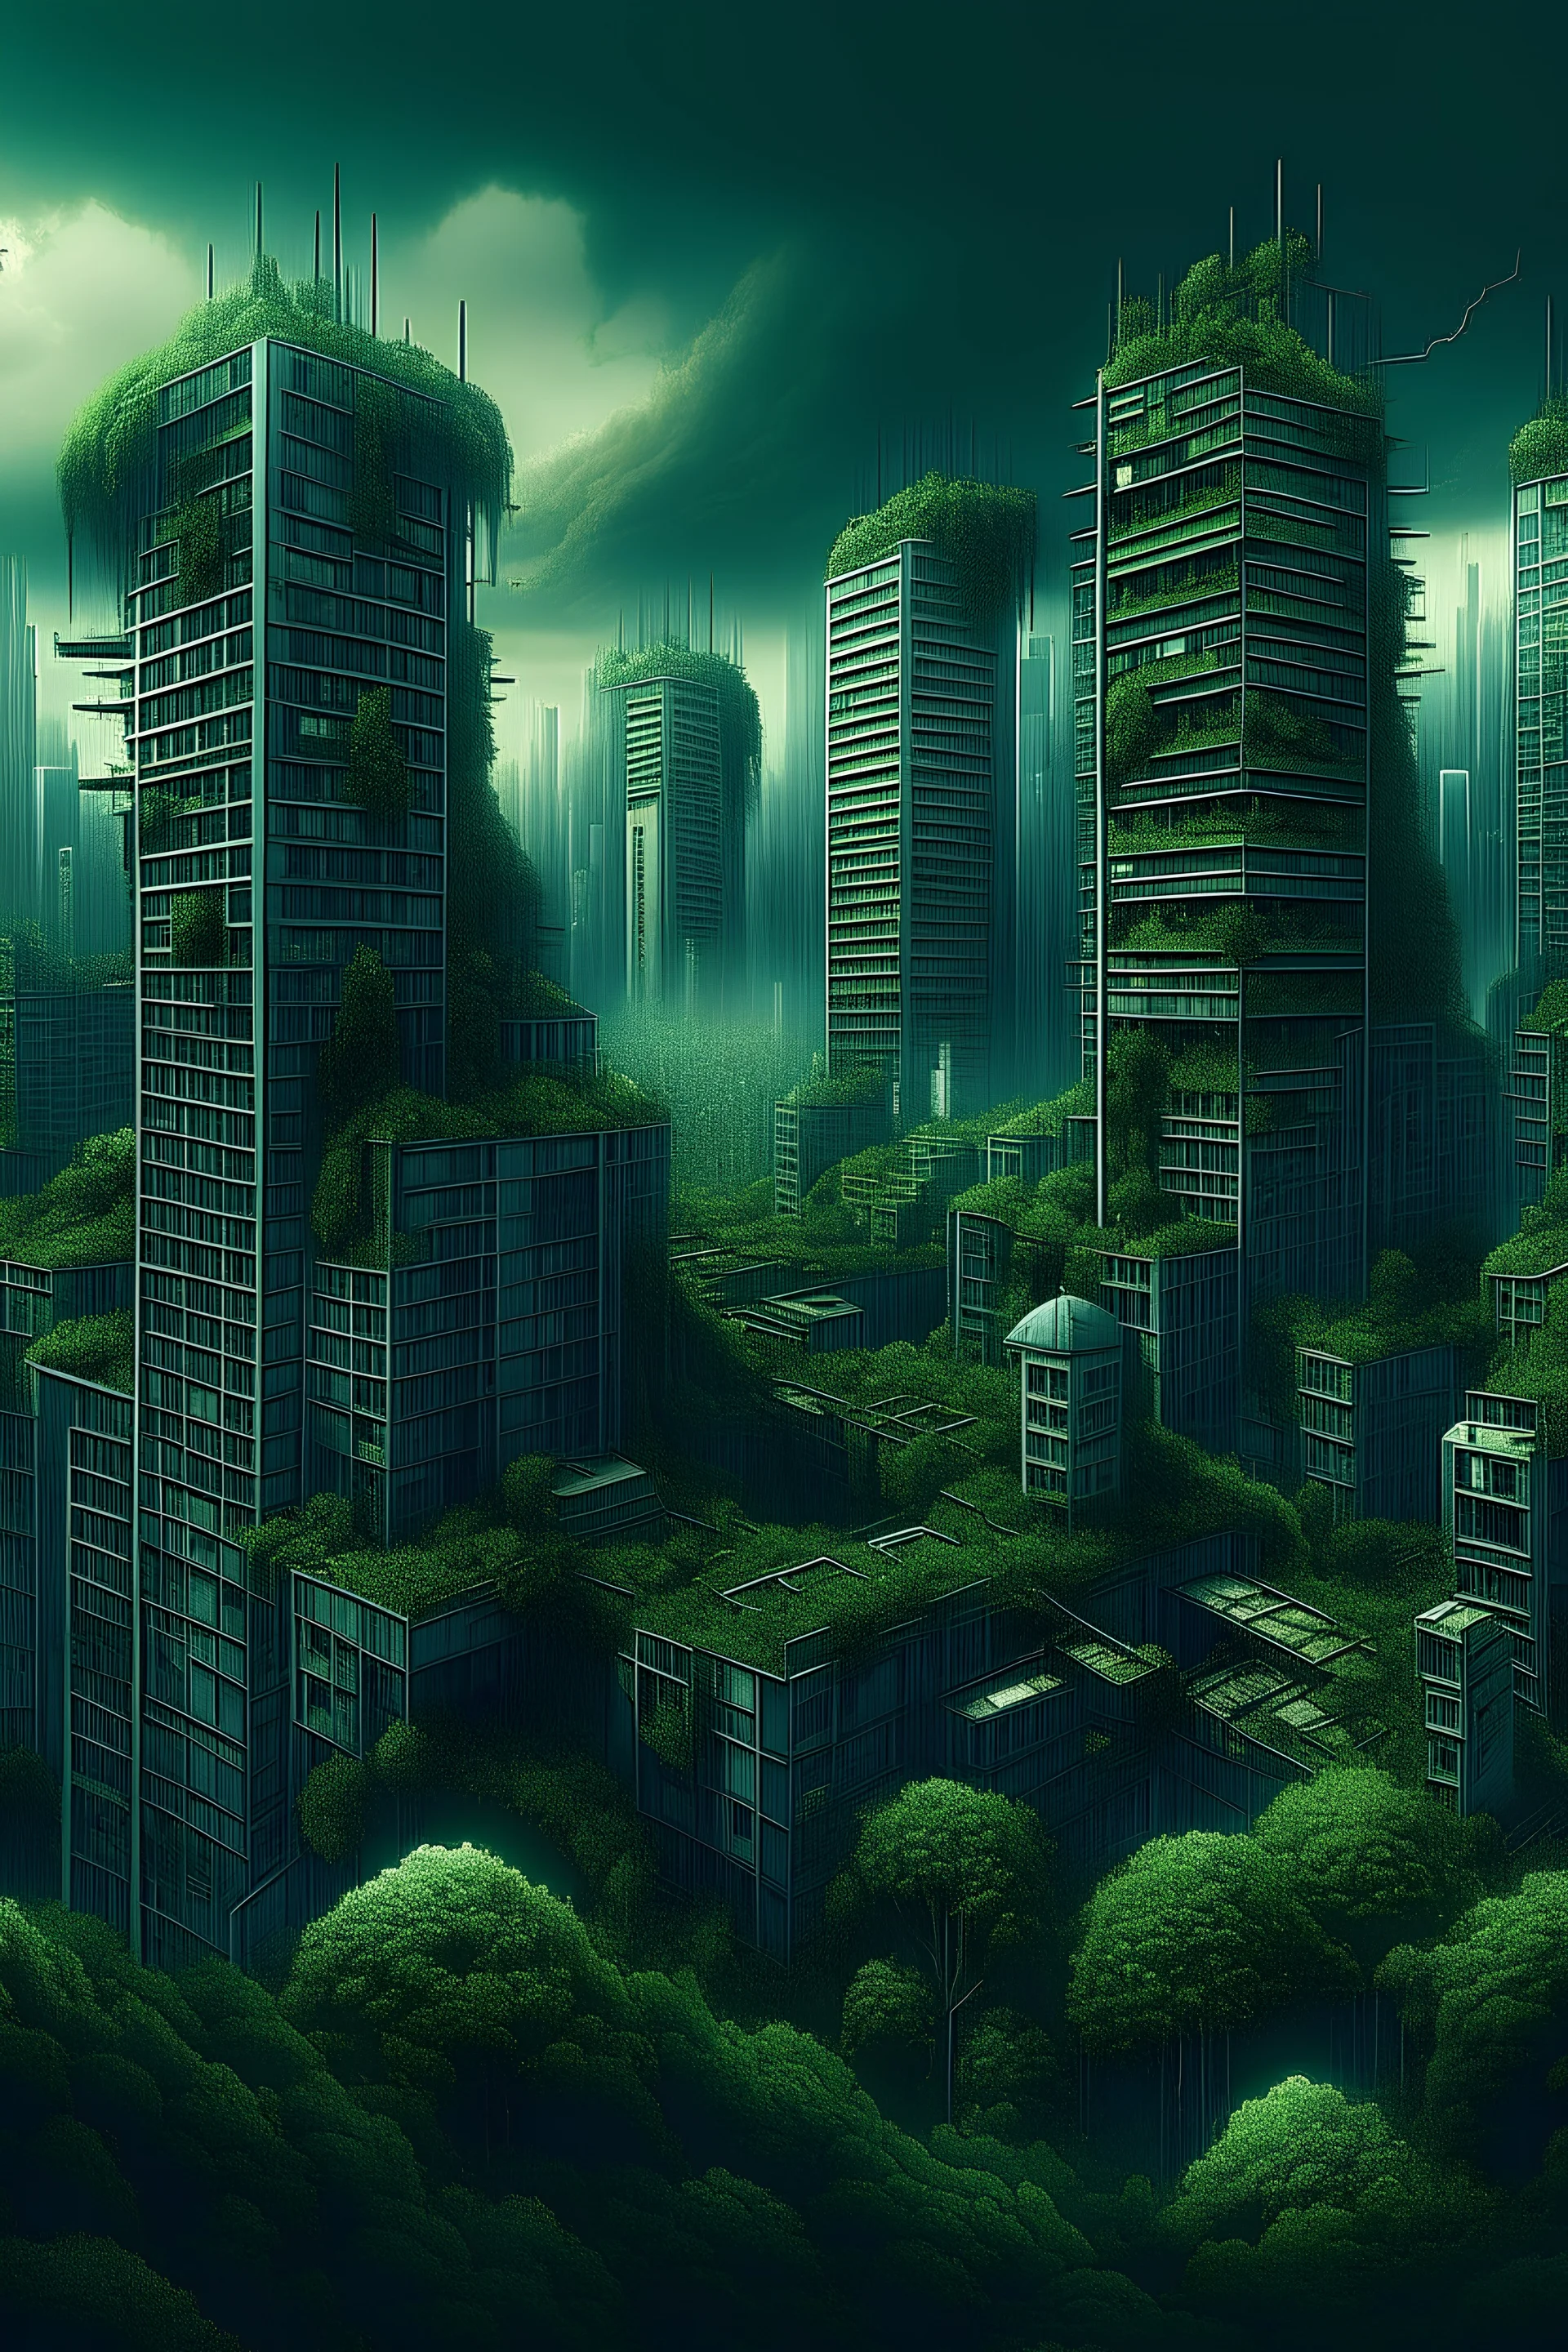 Huge dark green epic city with treehouses skyscrapers